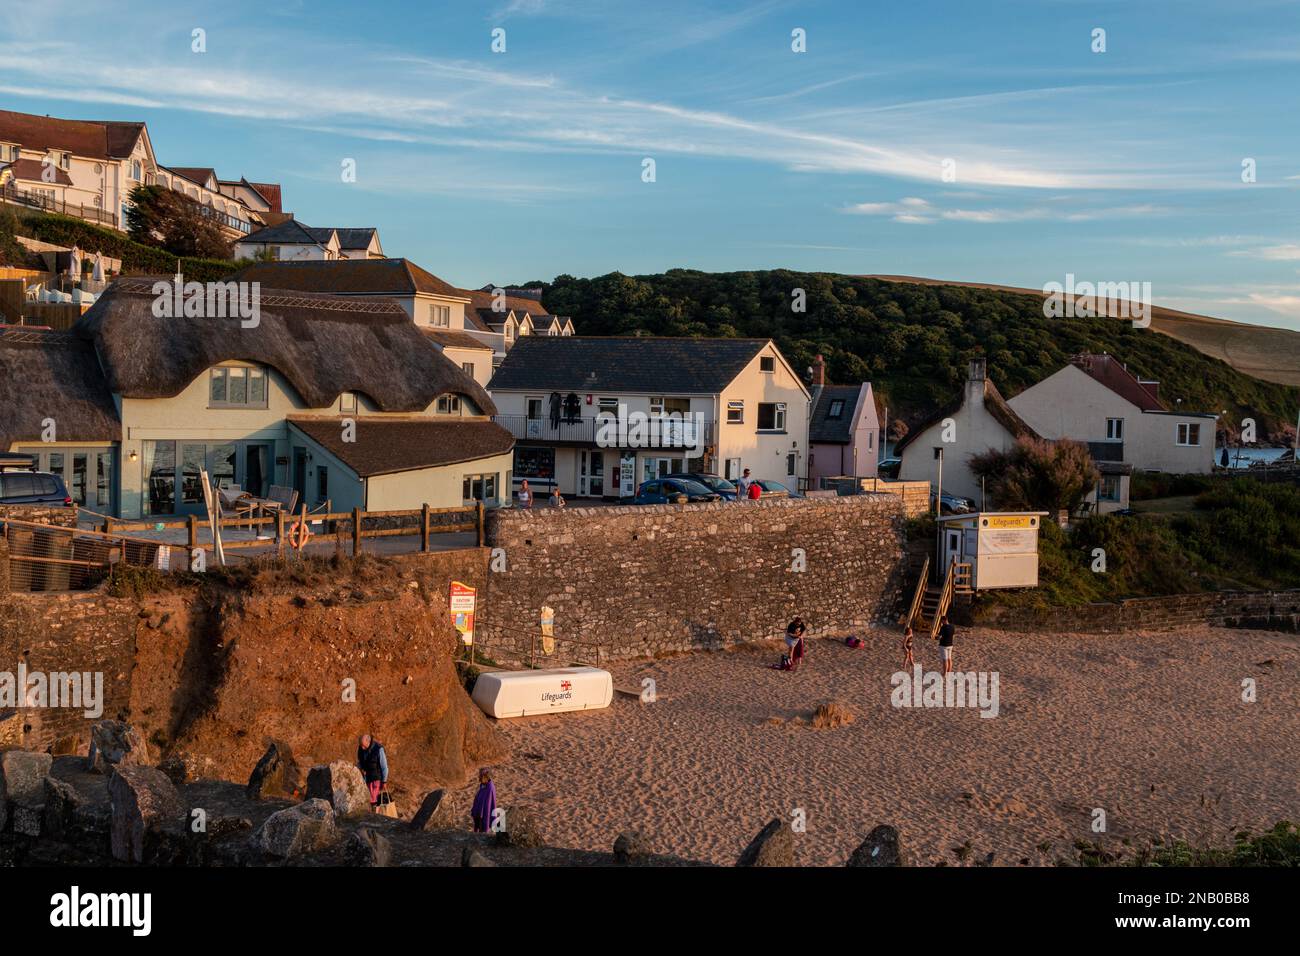 A view across Mouthwell Sands beach in Hope Cove, Devon, at sunset. Stock Photo